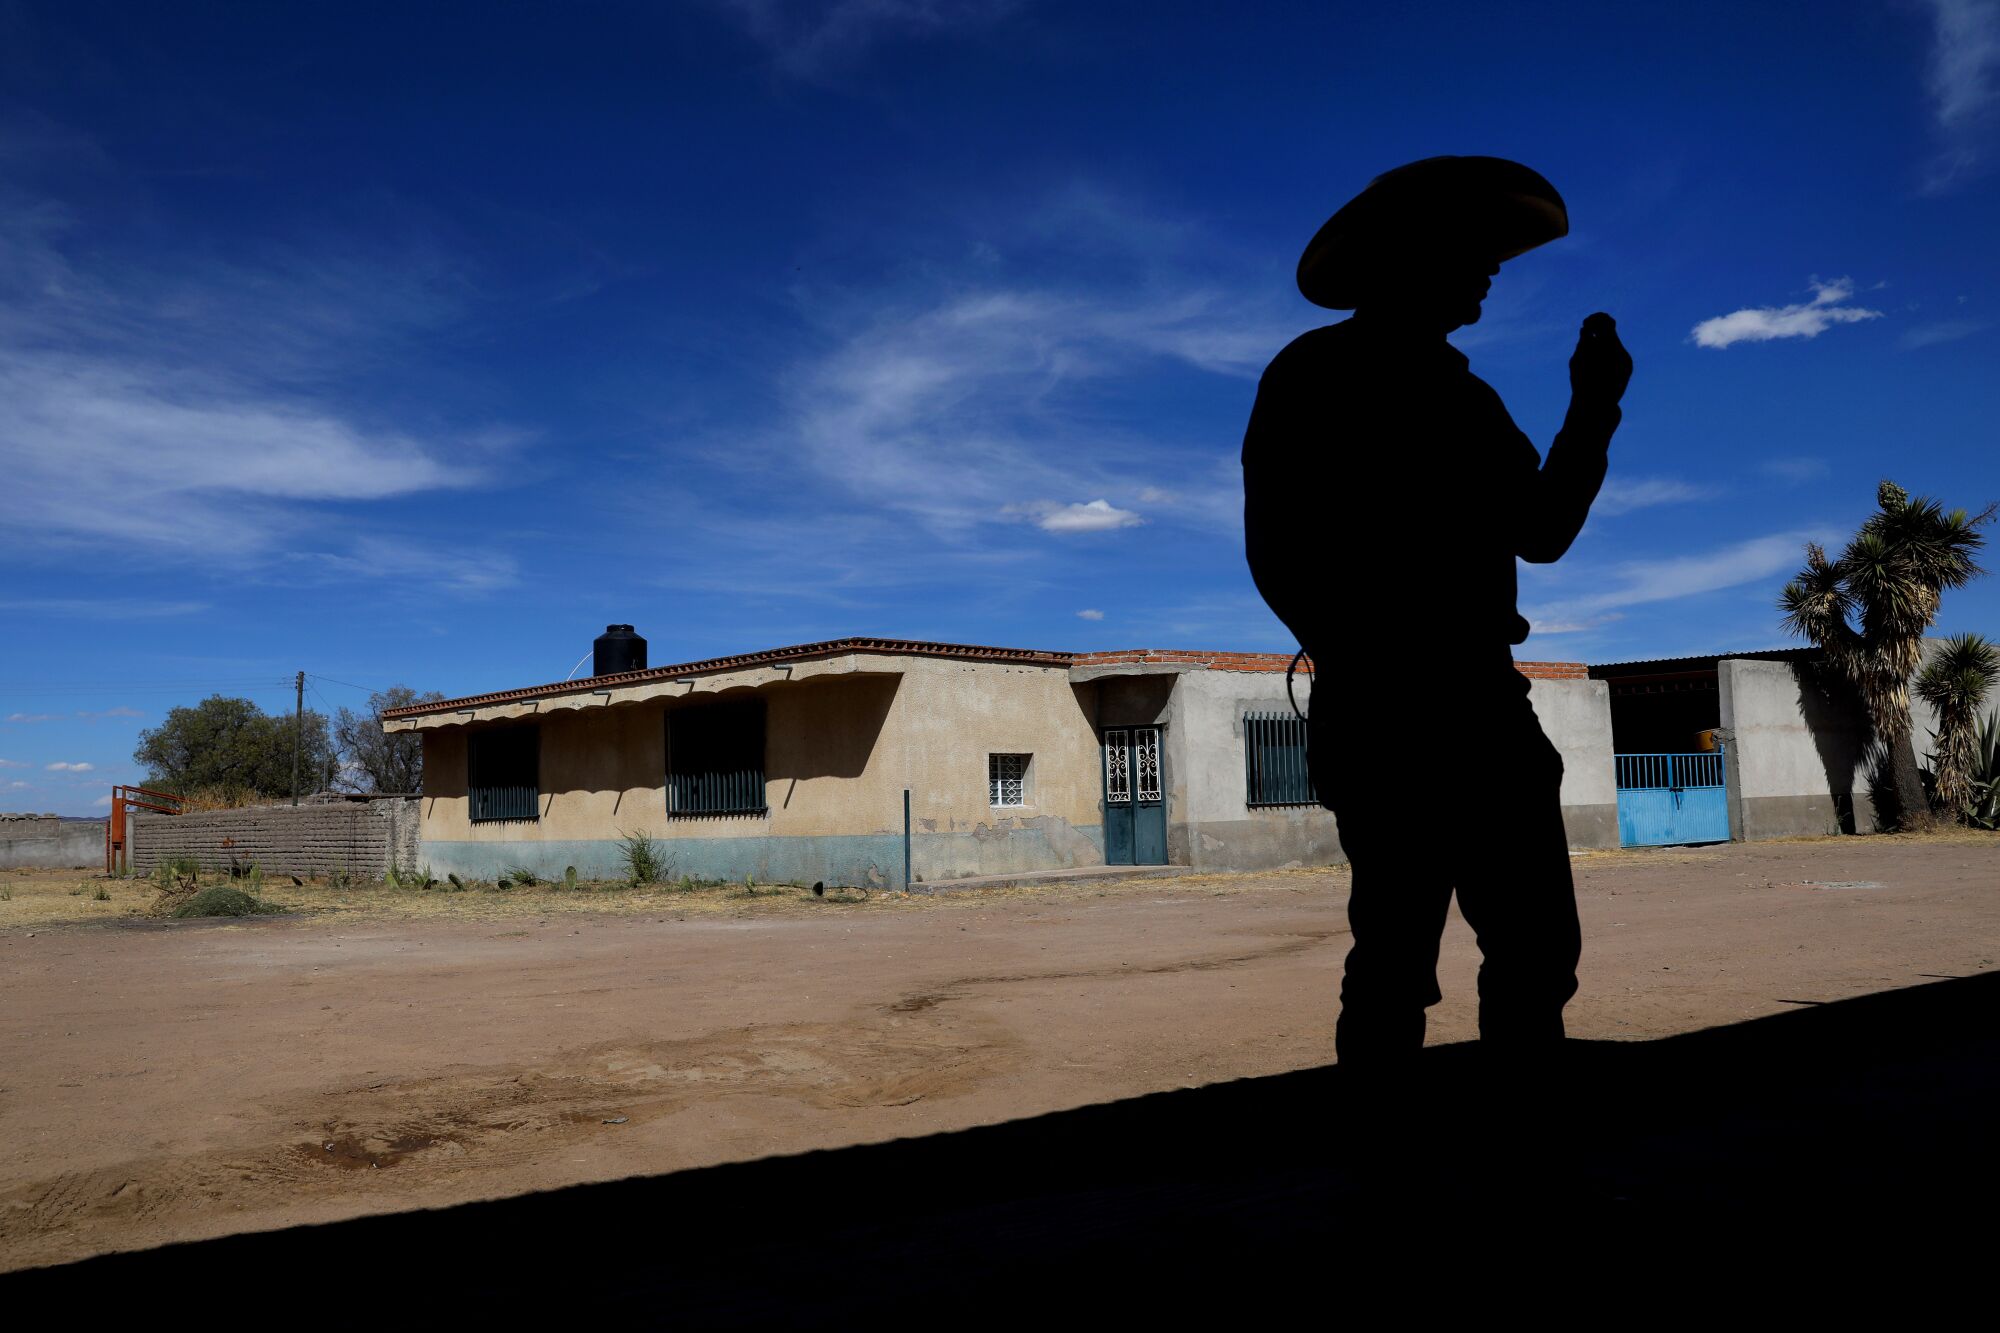 Dream interrupted: As gang violence soars in Mexico, migrants in U.S. rethink plans to go home